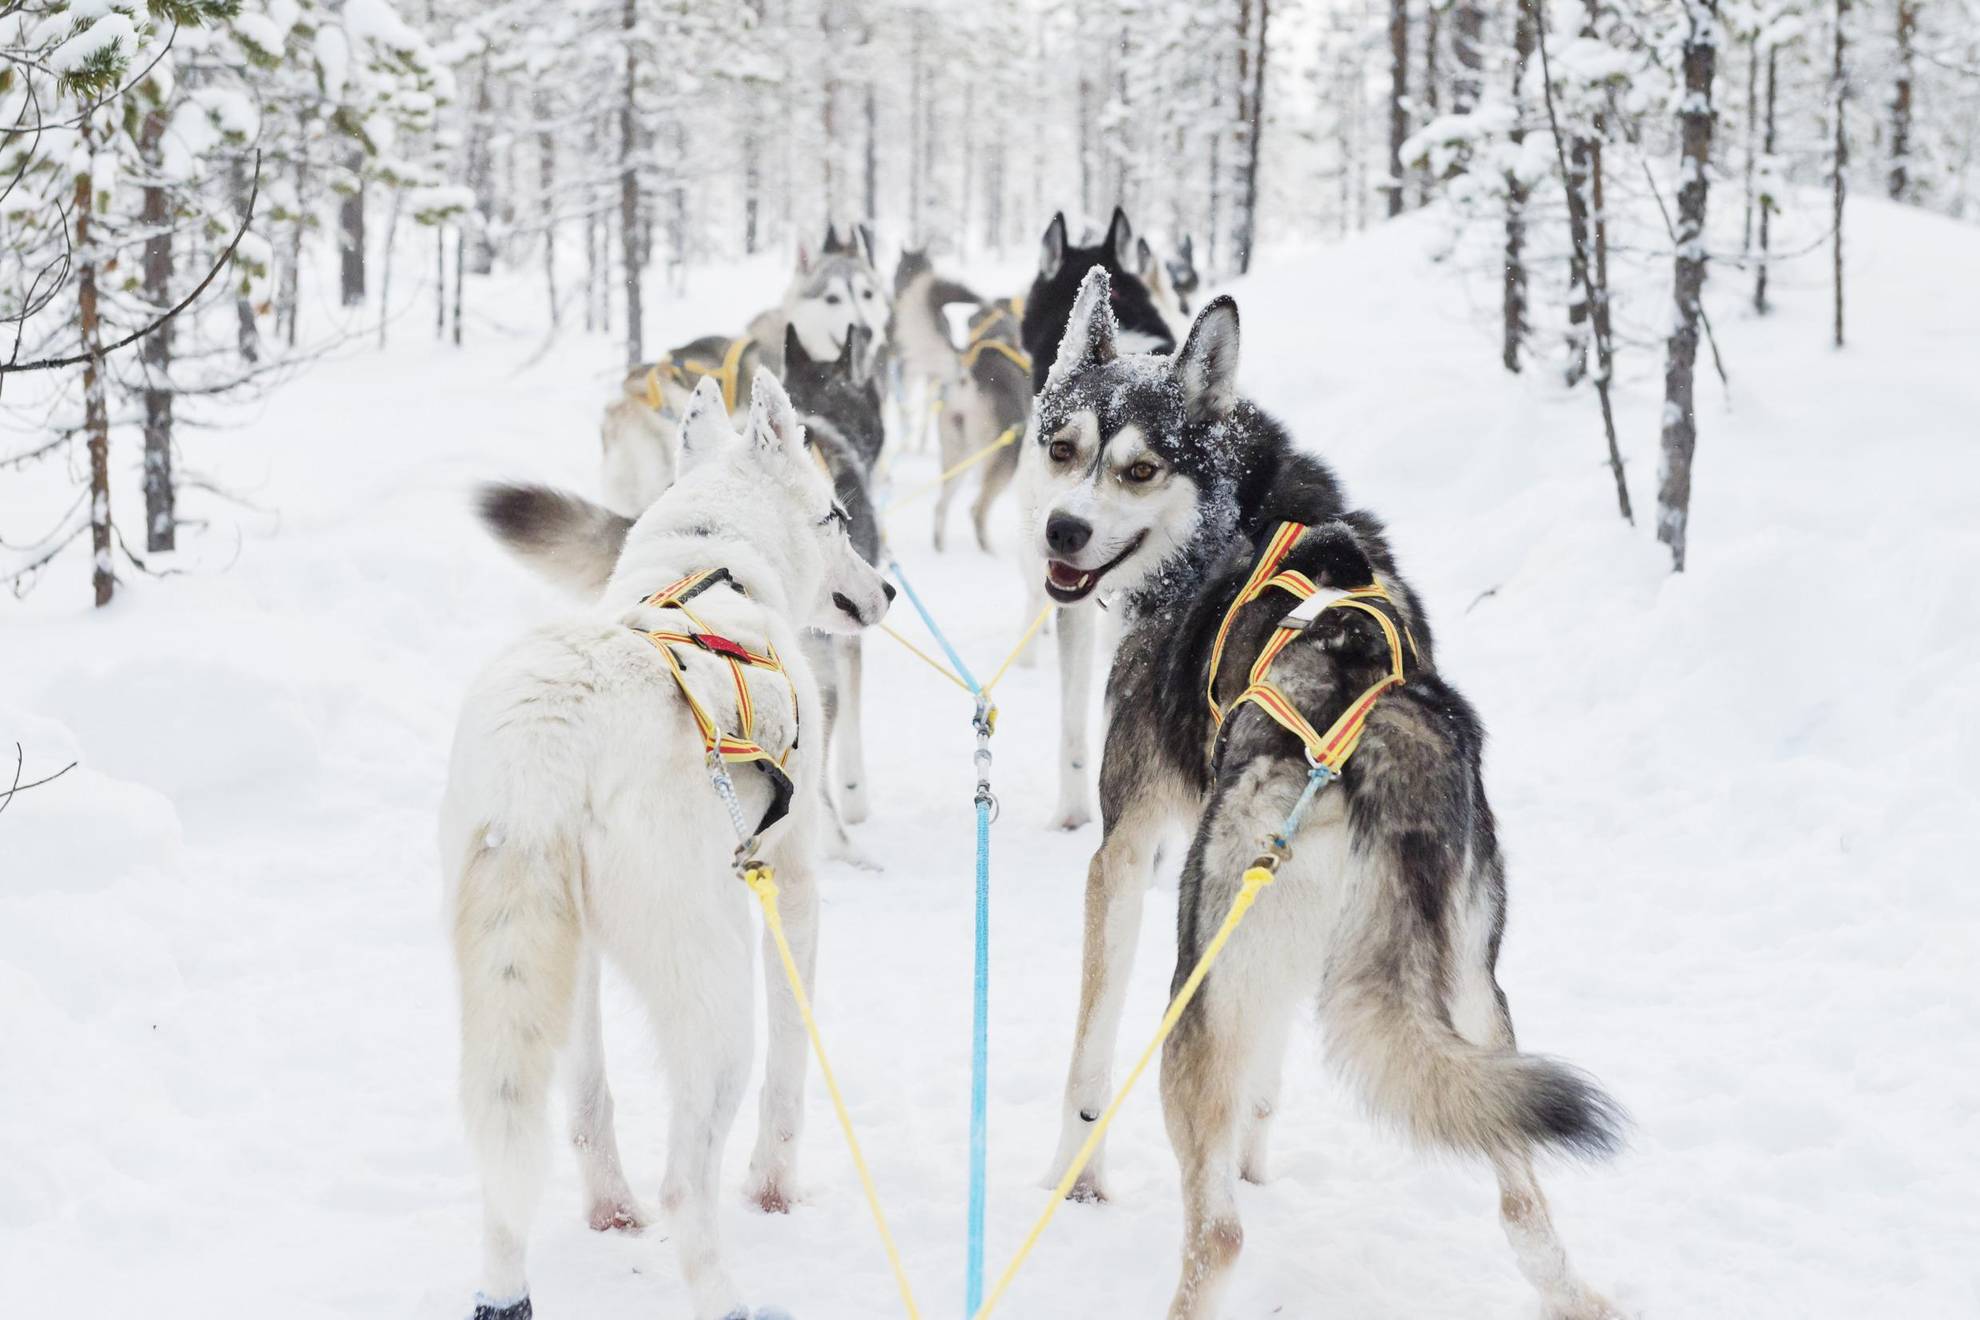 Siberian Huskies are standing ready to pull a dog sled in a snowy forest.